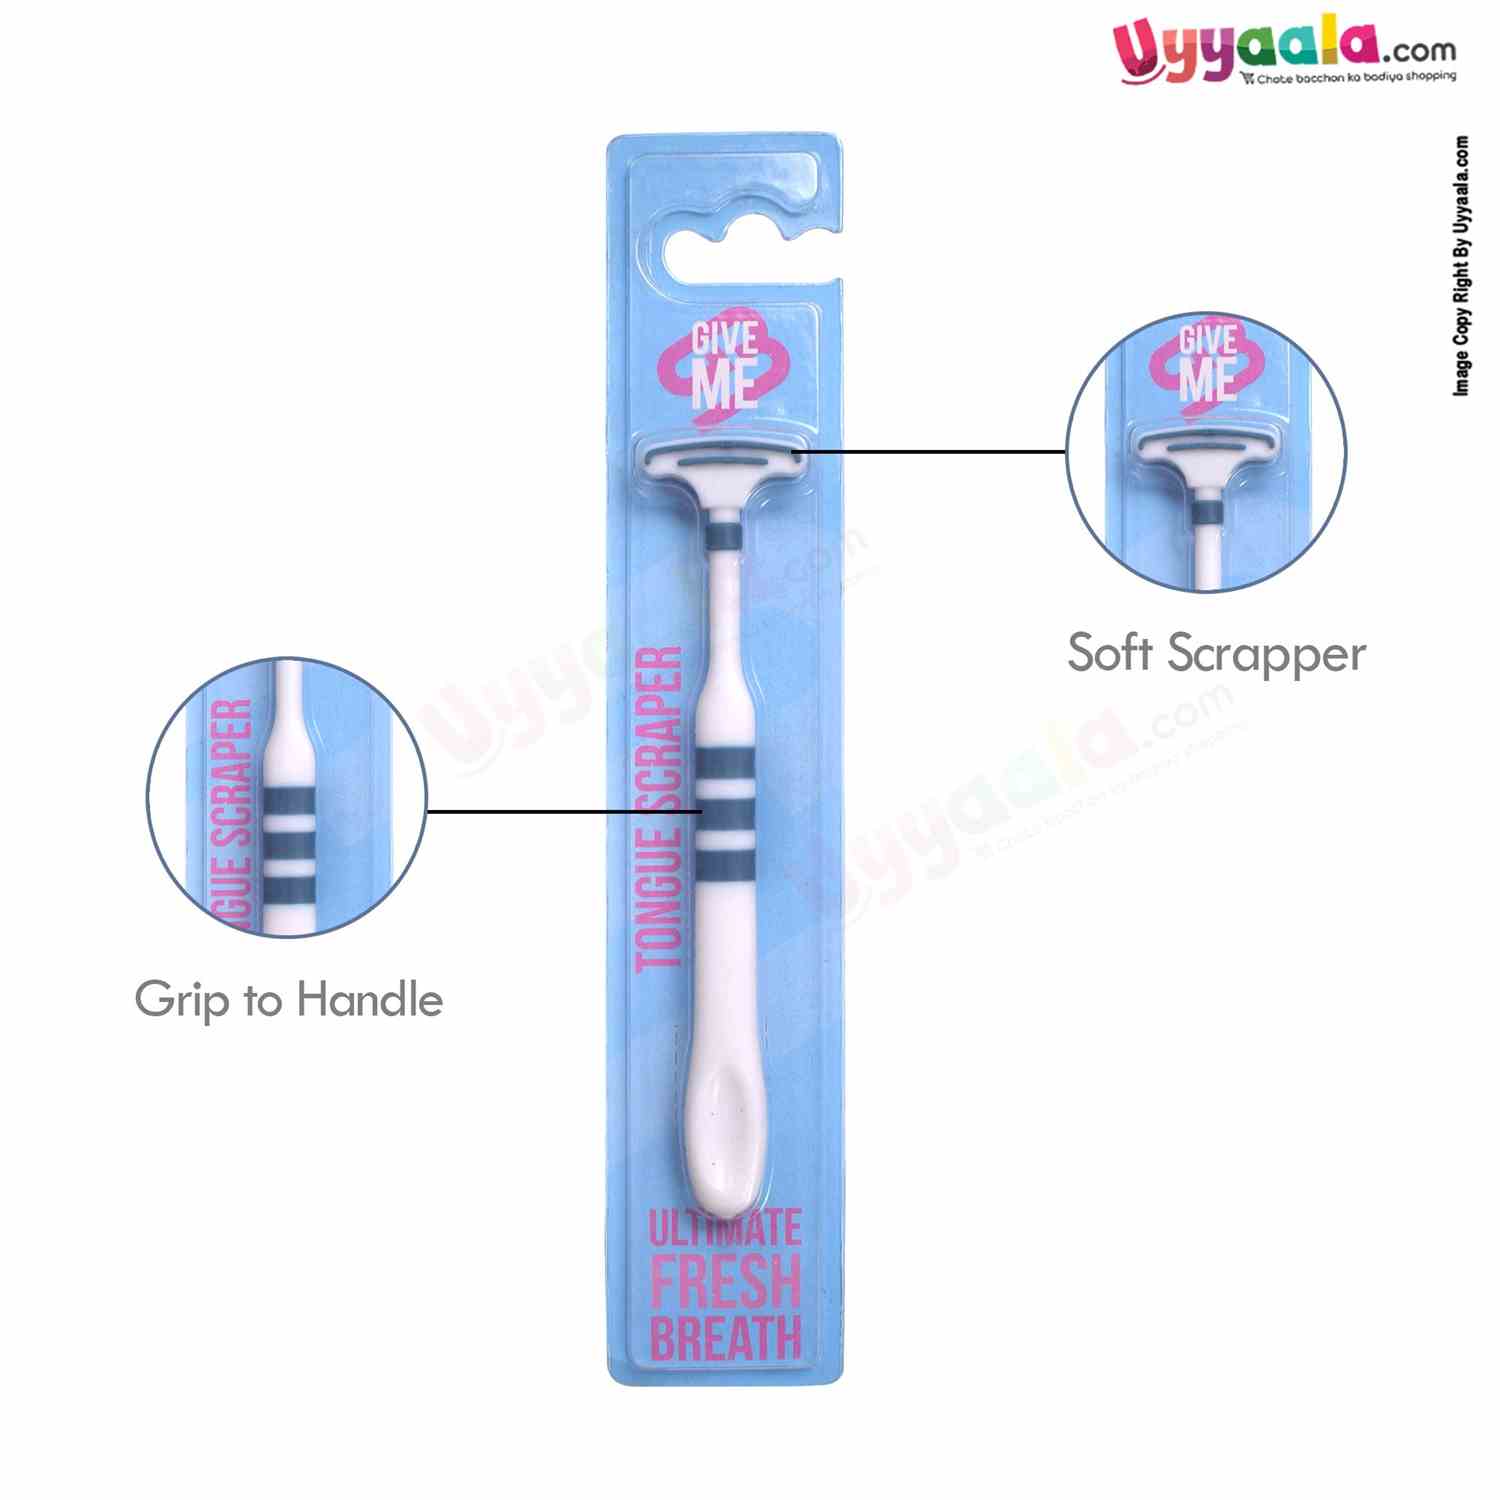 GIVE ME baby Tongue Scraper for Fresh Breath 1pc 10+m age - White, Green